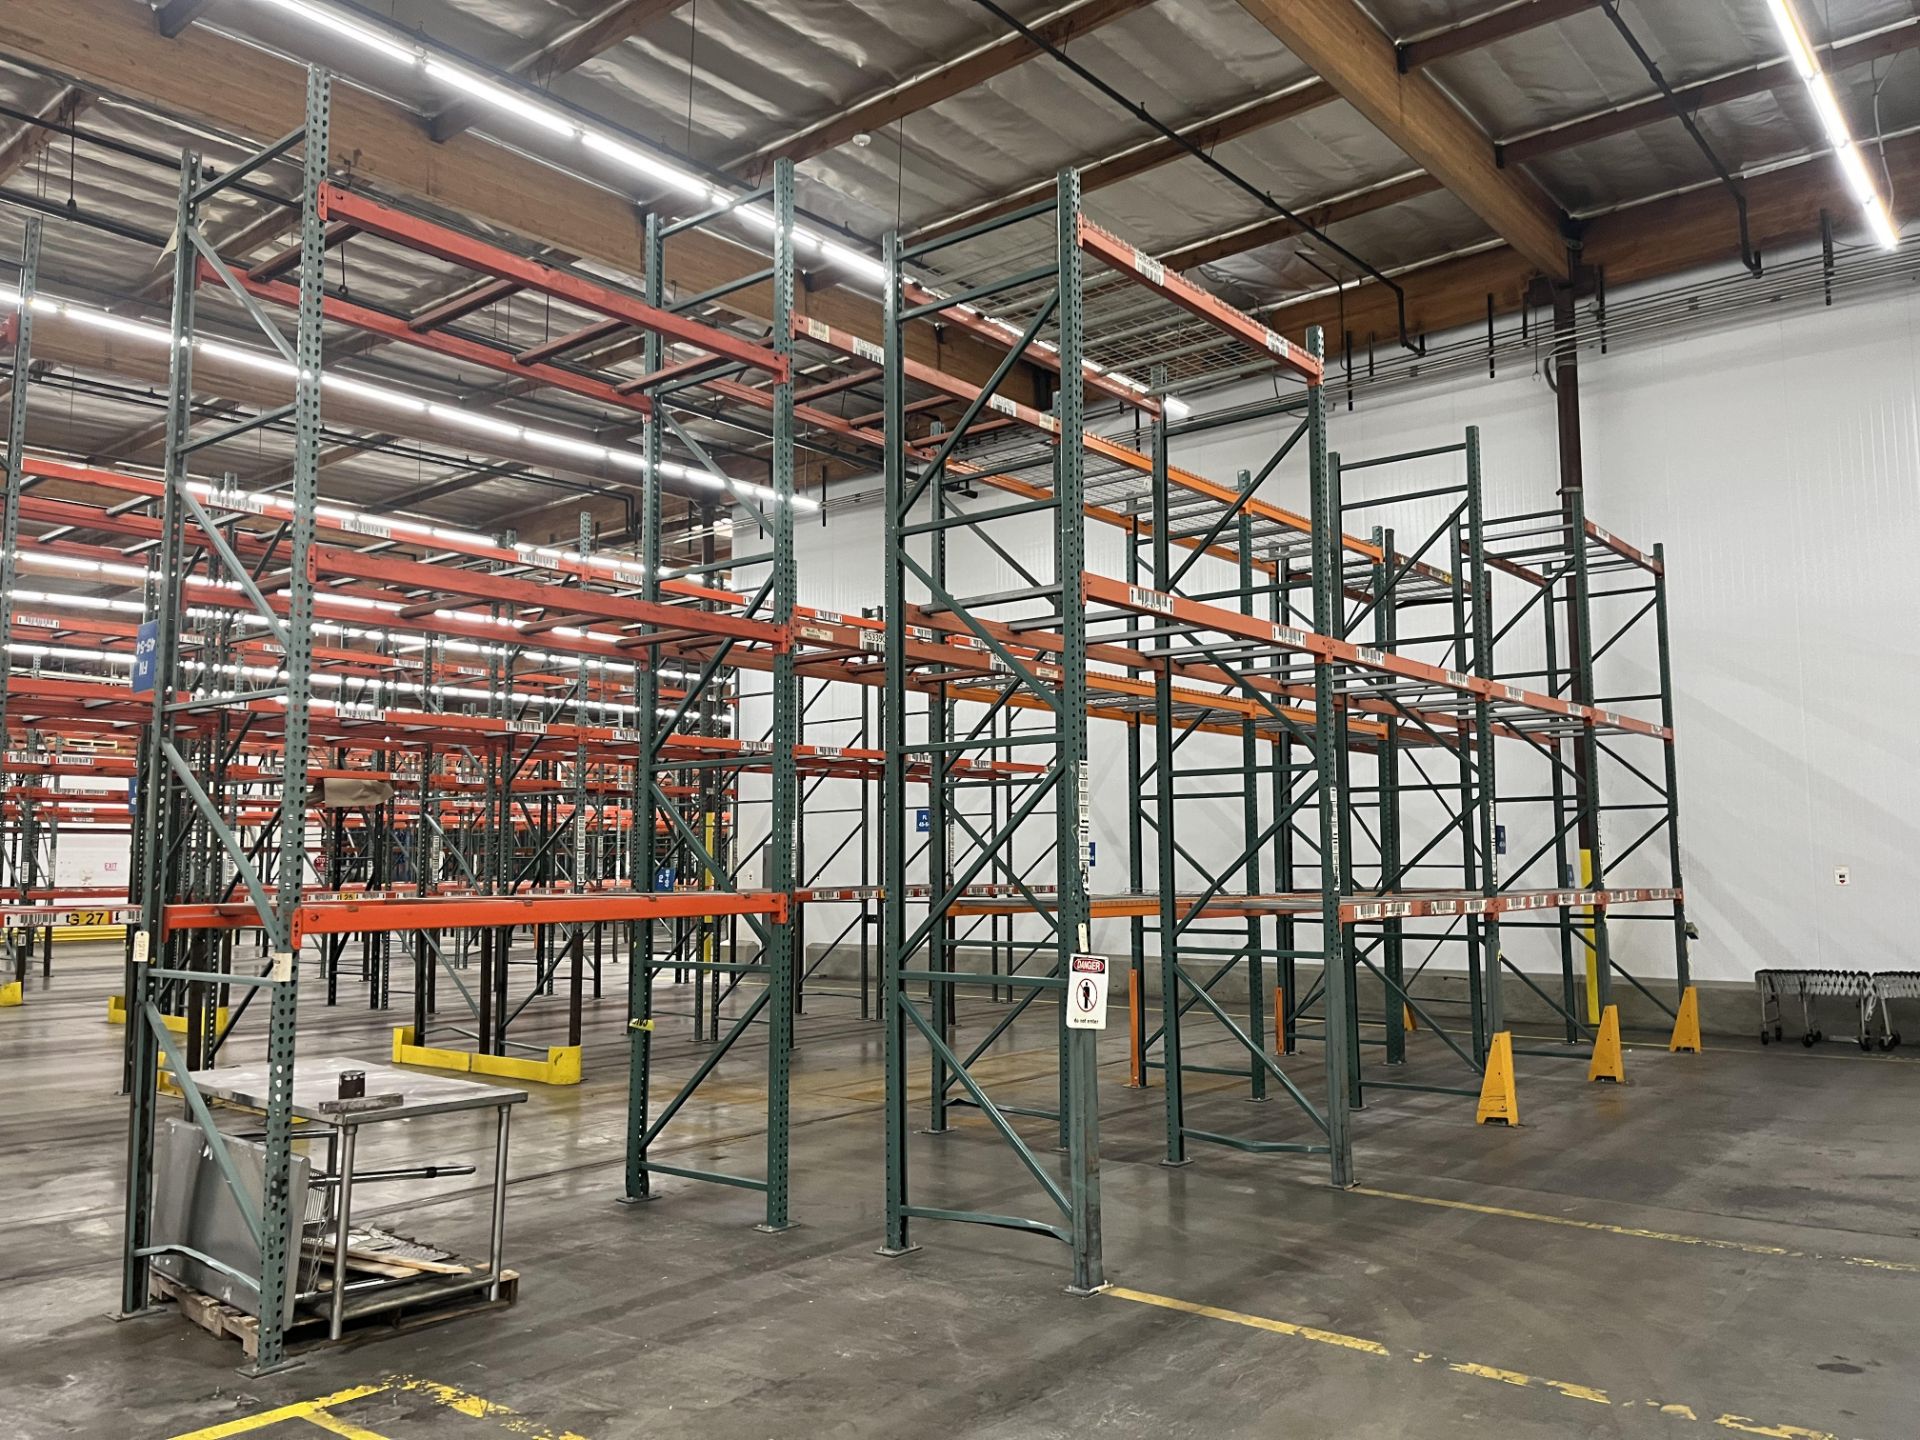 30 sections teardrop pallet racking, fits two pallets per section (Rigging Fee: 7500)